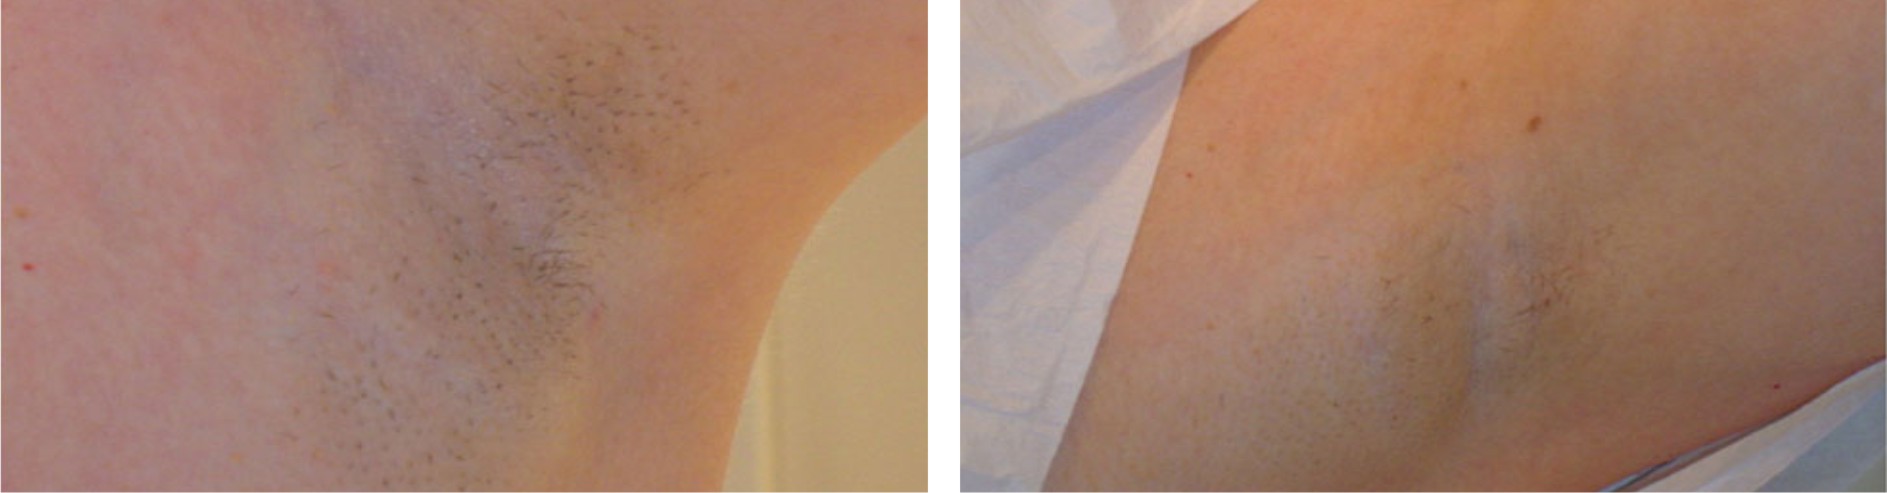 Laser Hair Removal Image Three